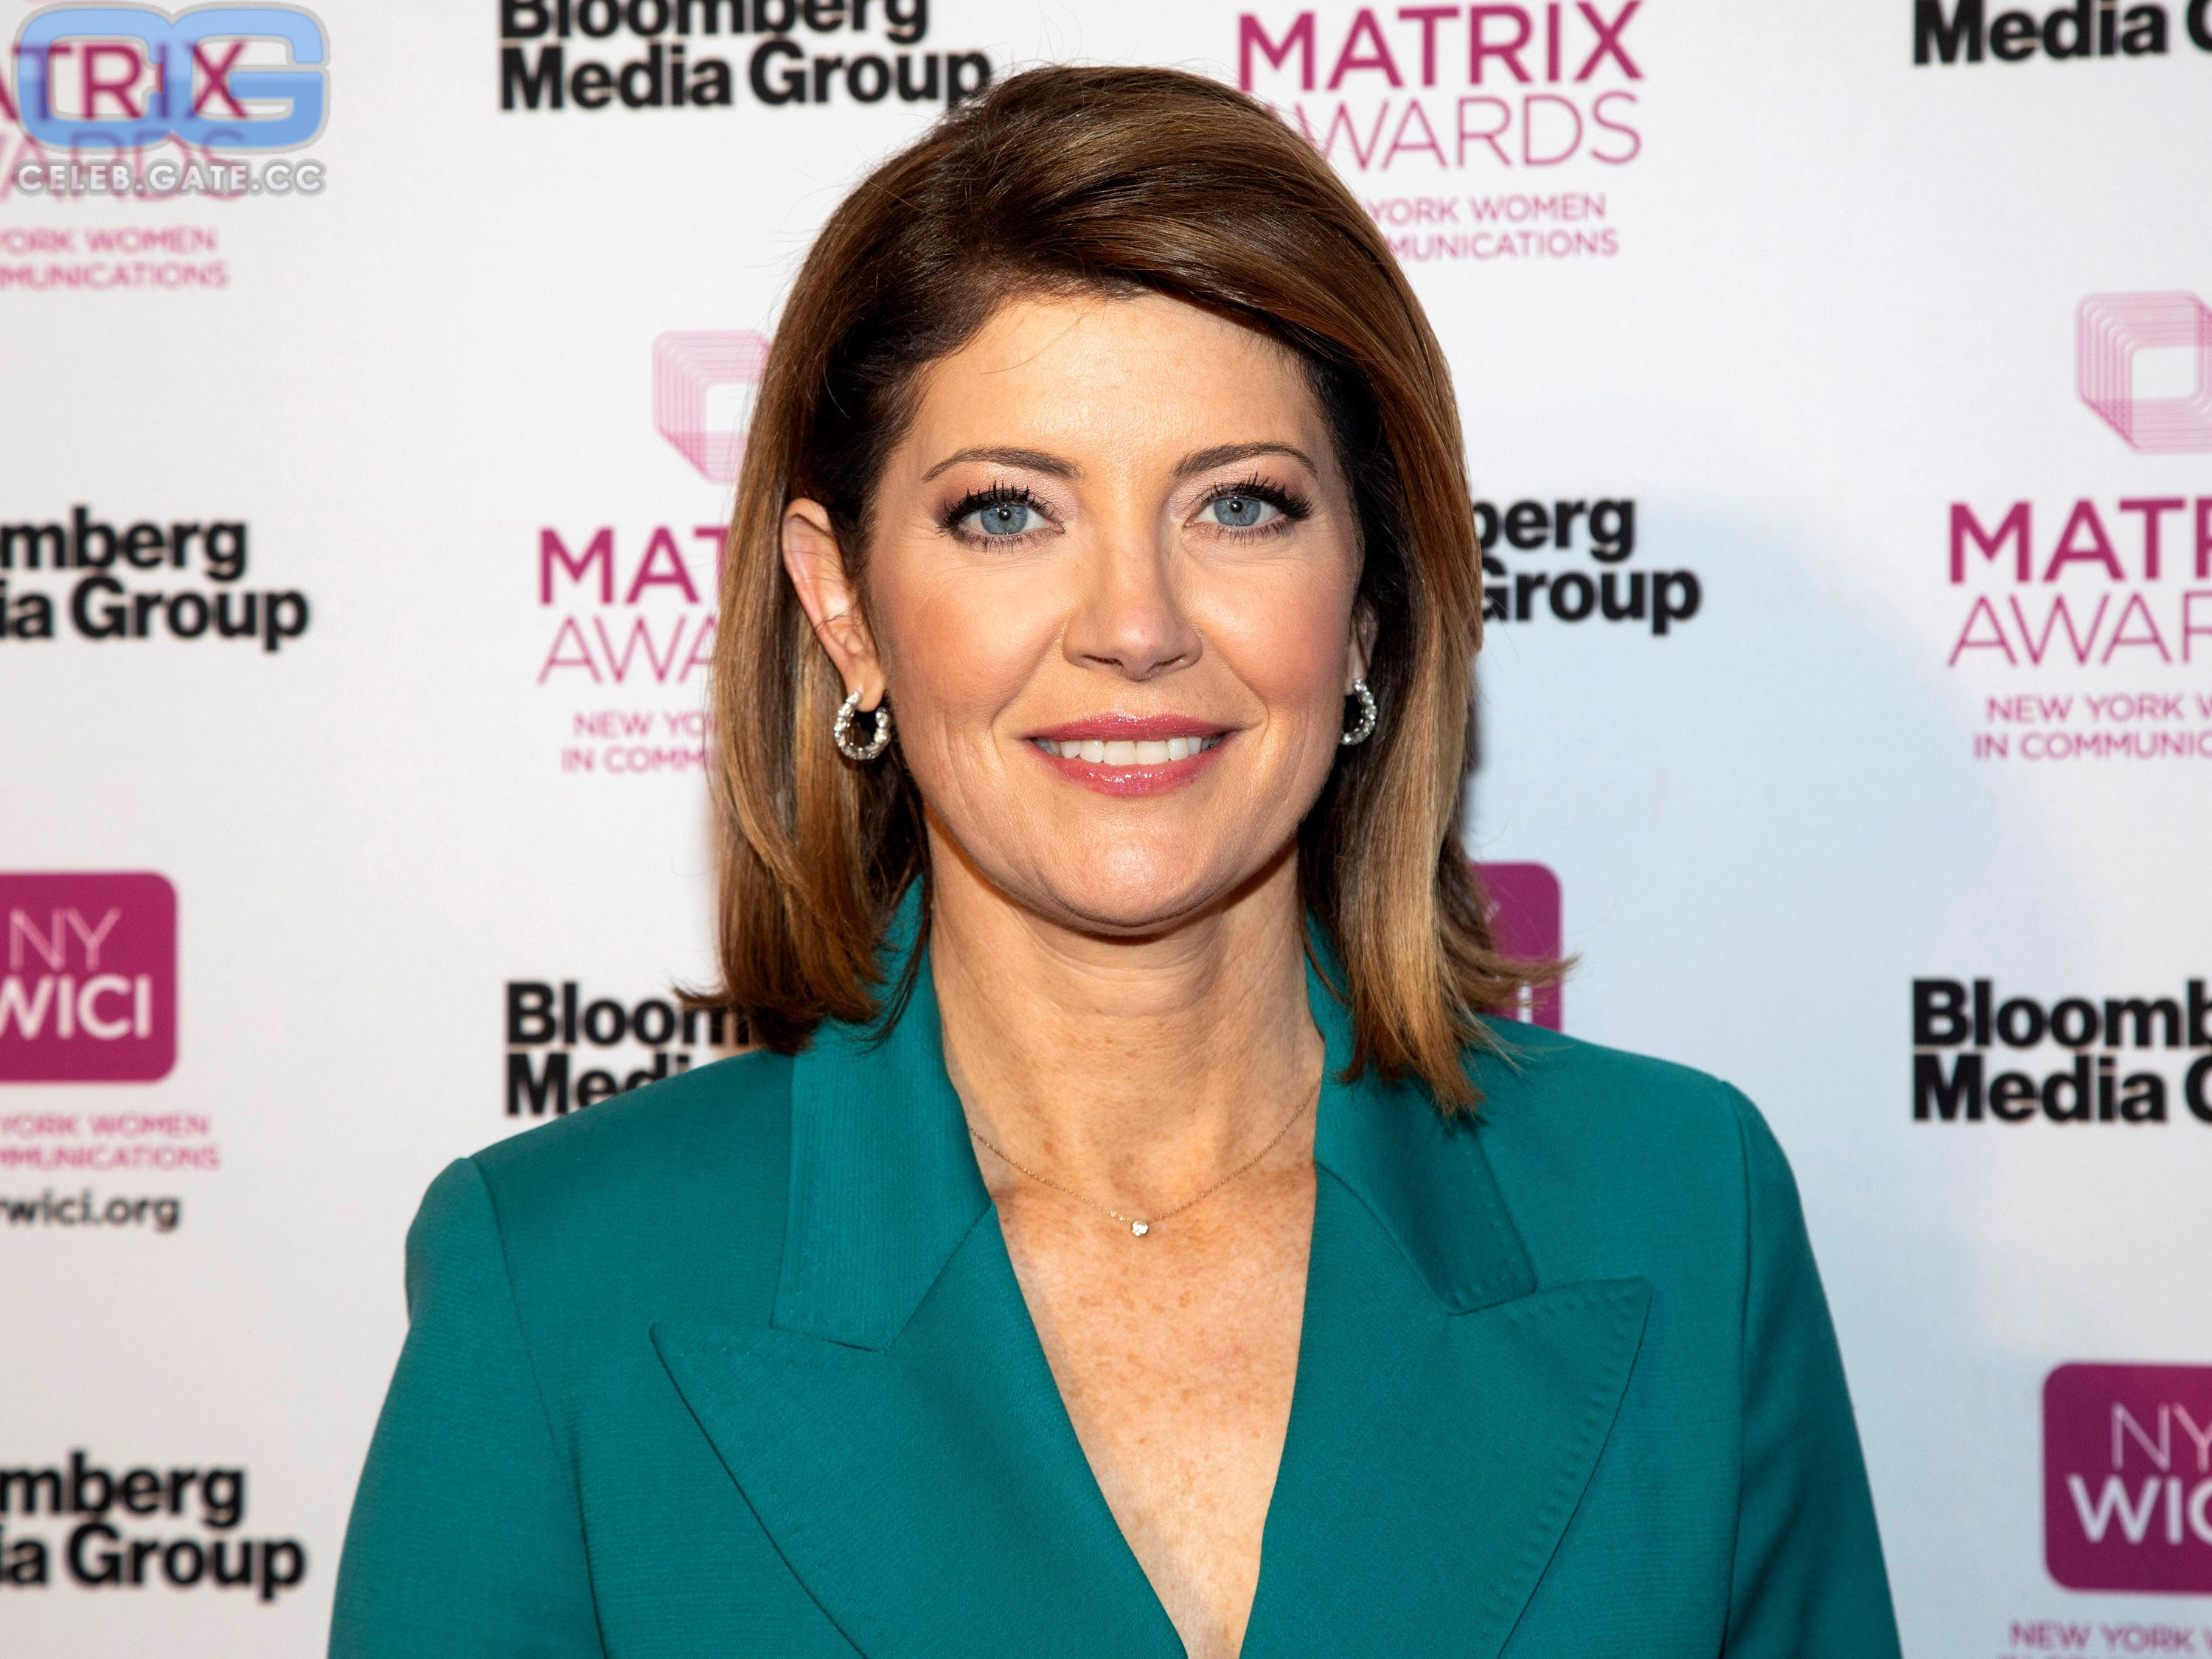 Norah O'Donnell 